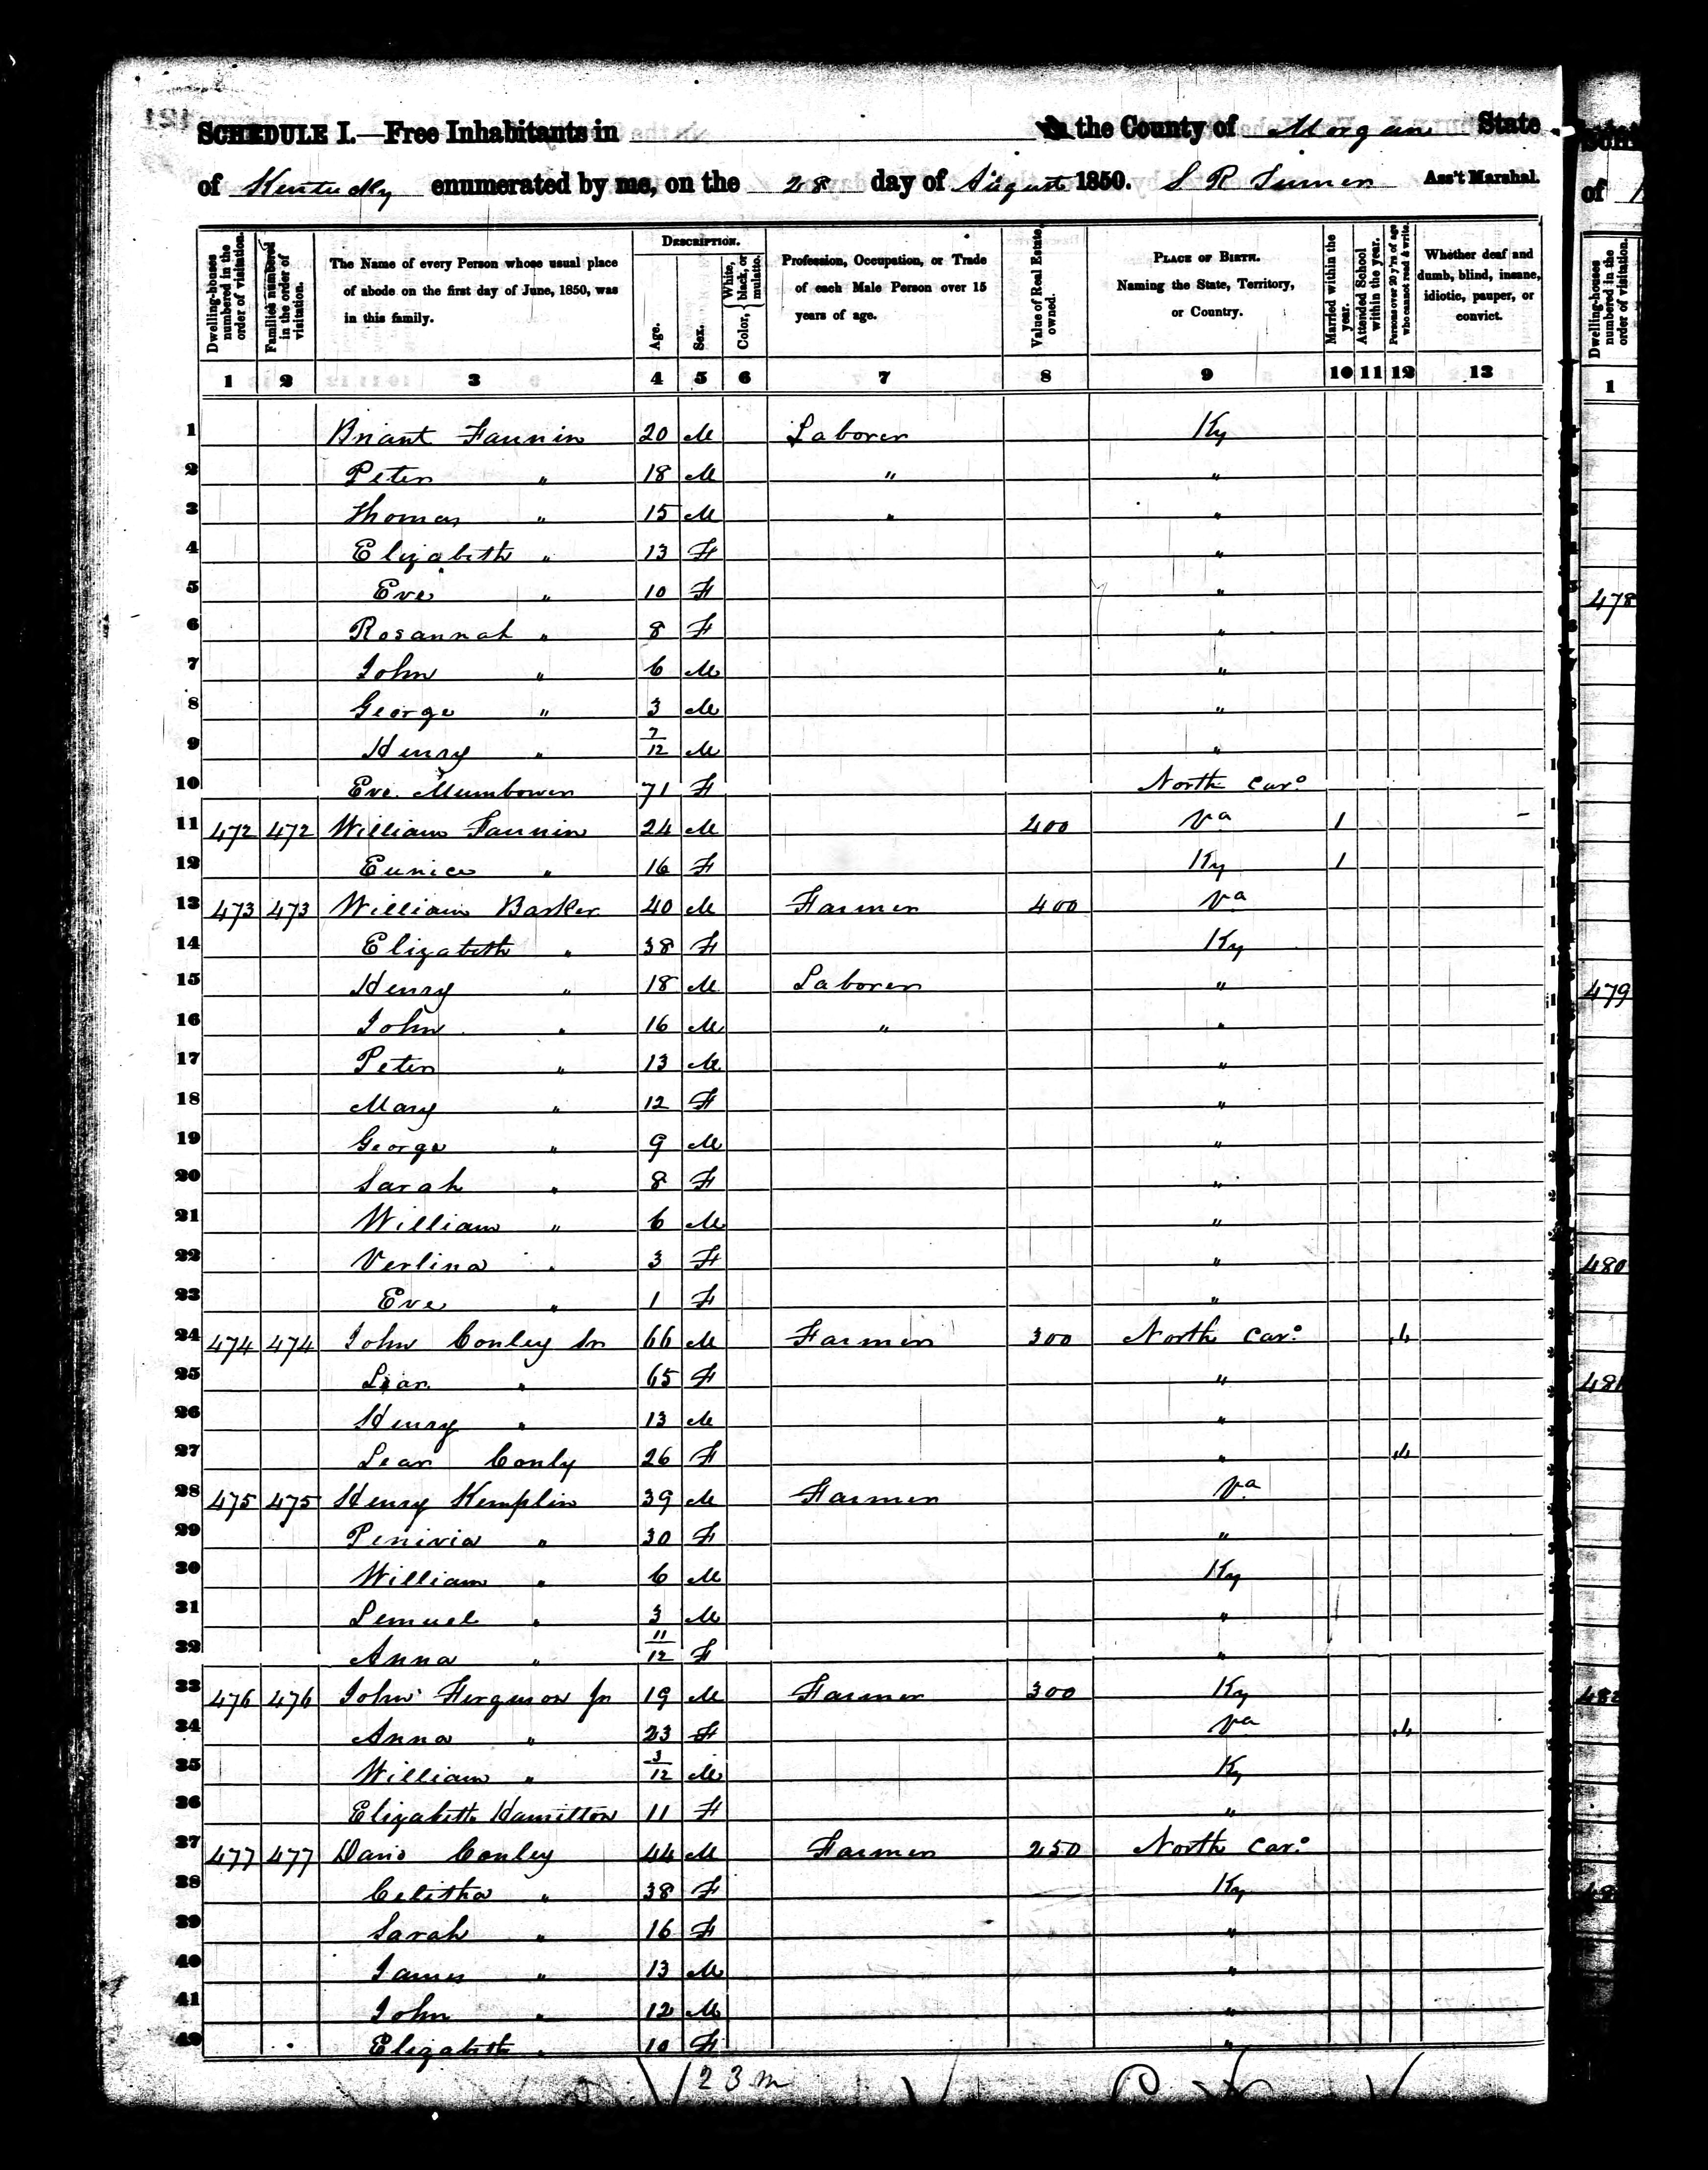 1850 Census, George Fannin, page 2